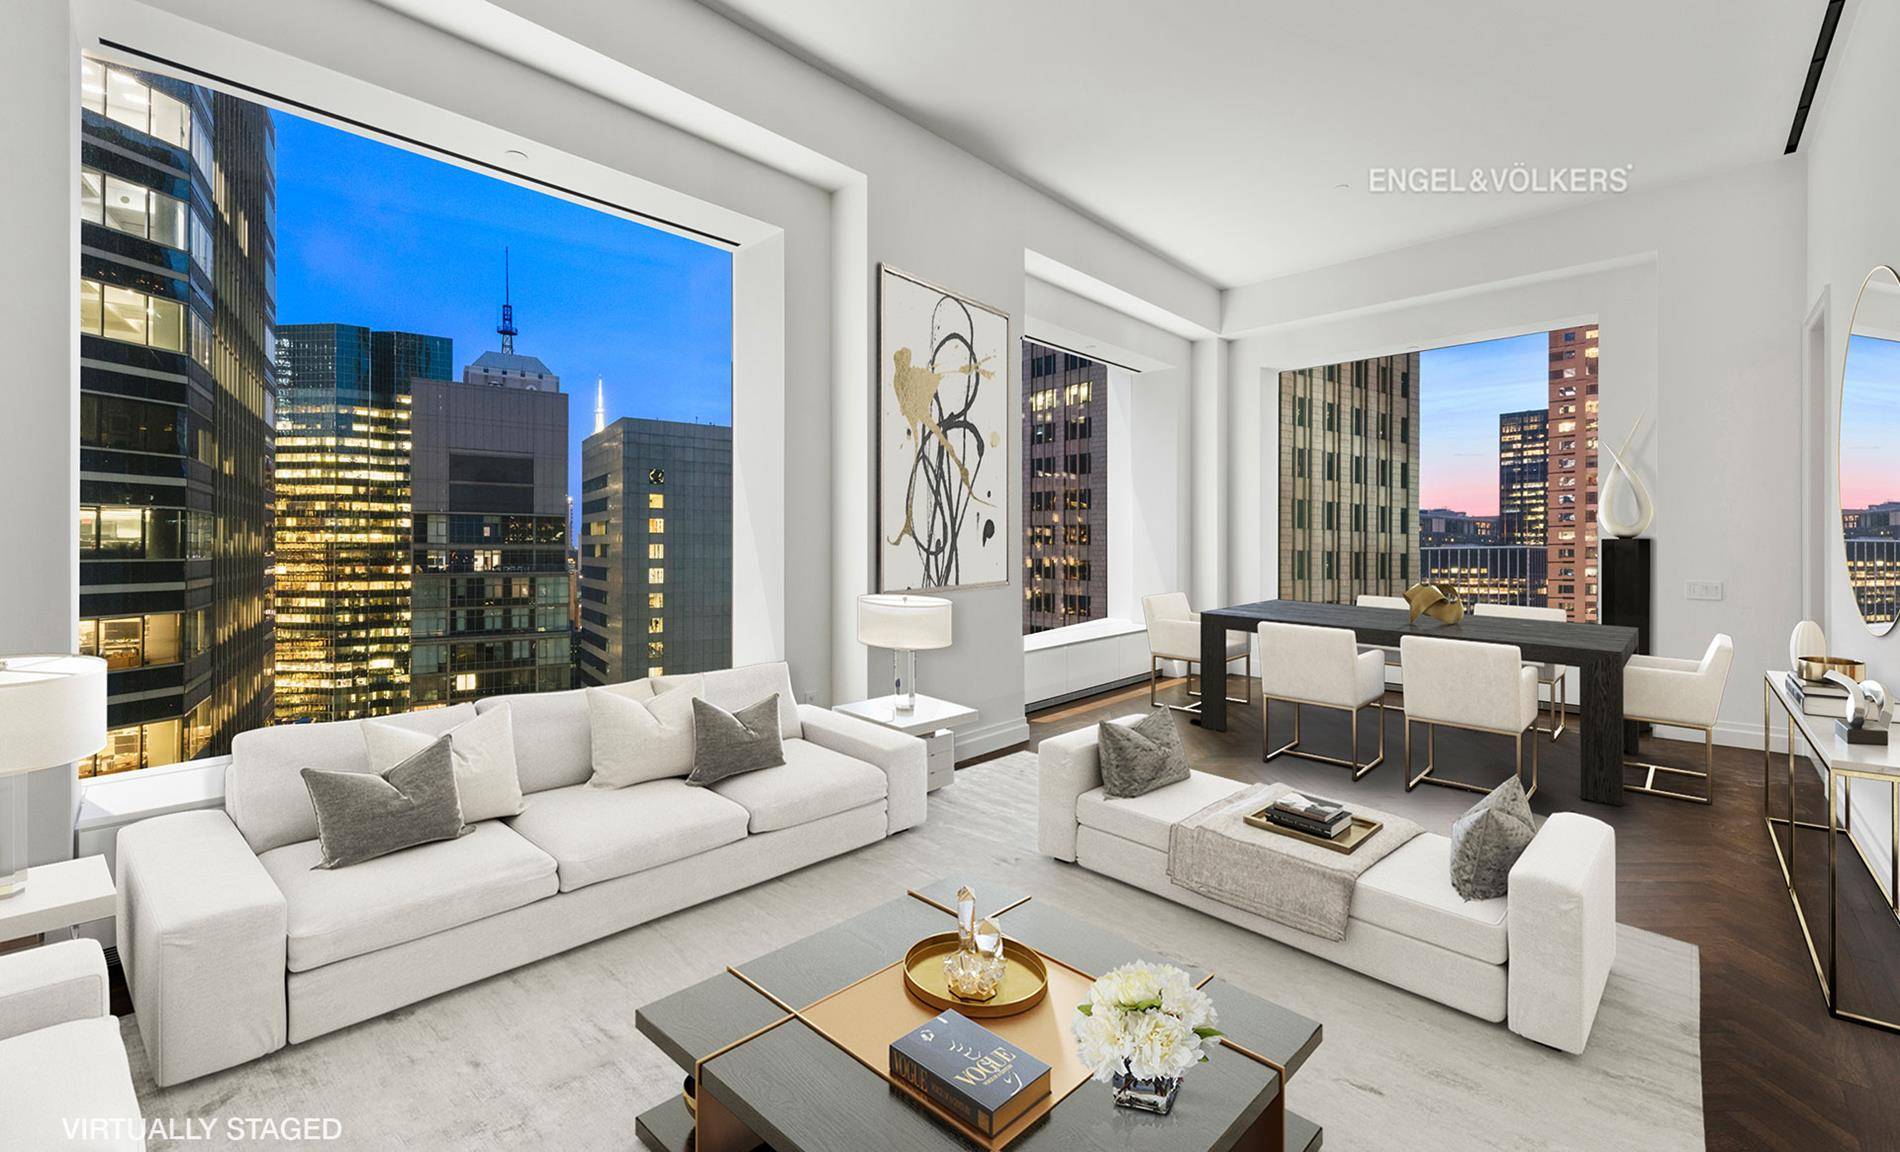 Unique opportunity to own a rarely available two bedroom two and a half bathroom home in the iconic 432 Park Avenue.